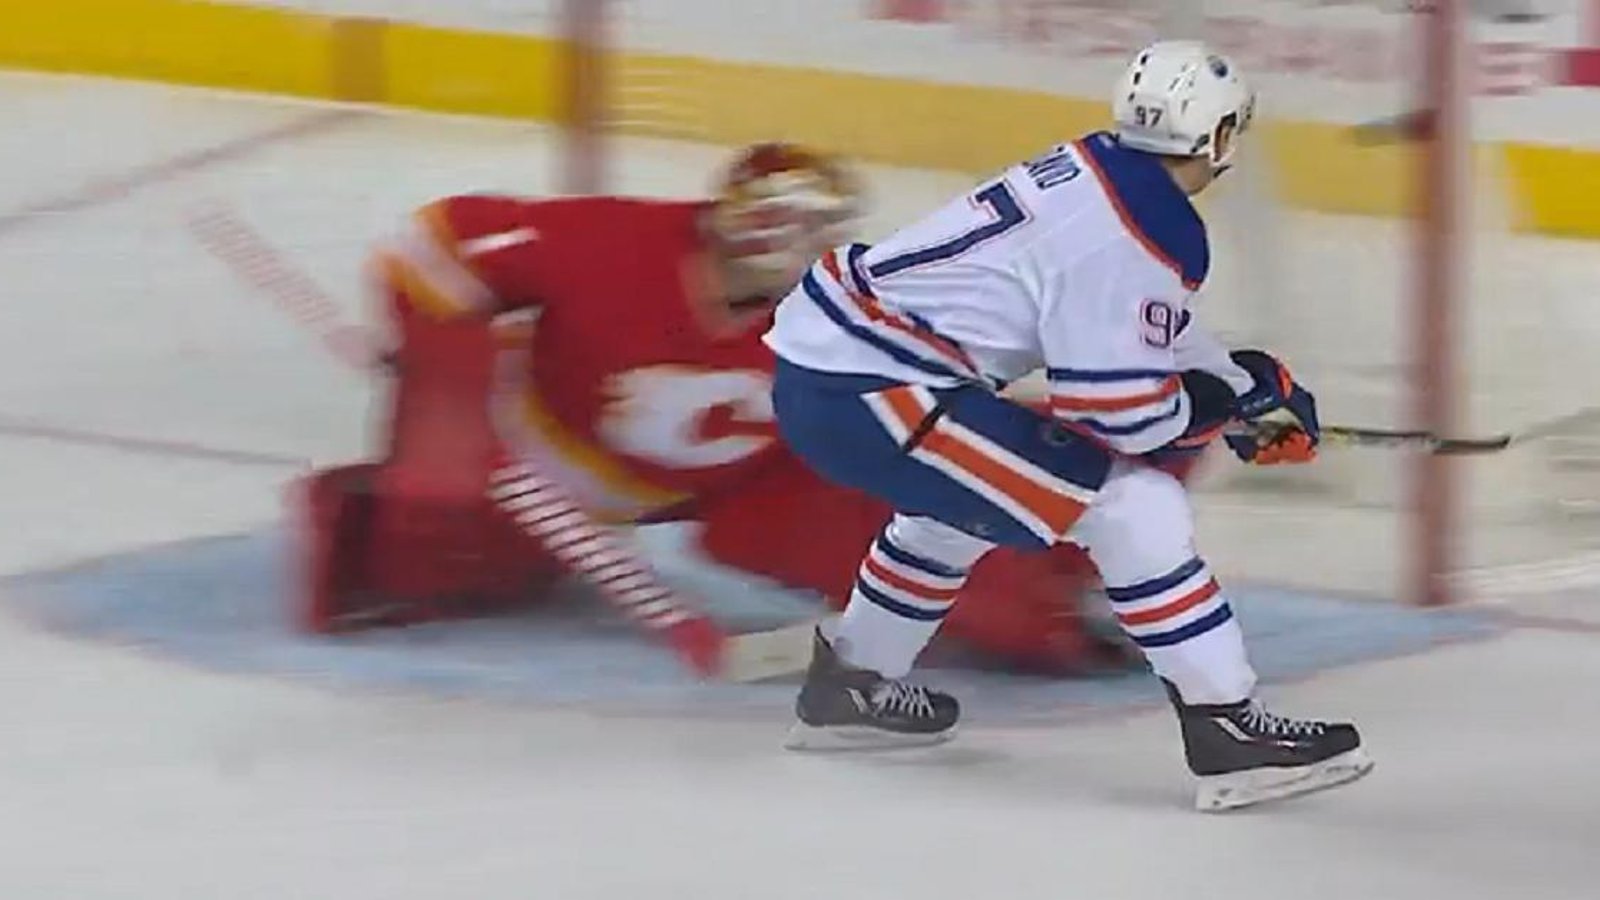 Connor McDavid once again gives Brian Elliott no chance